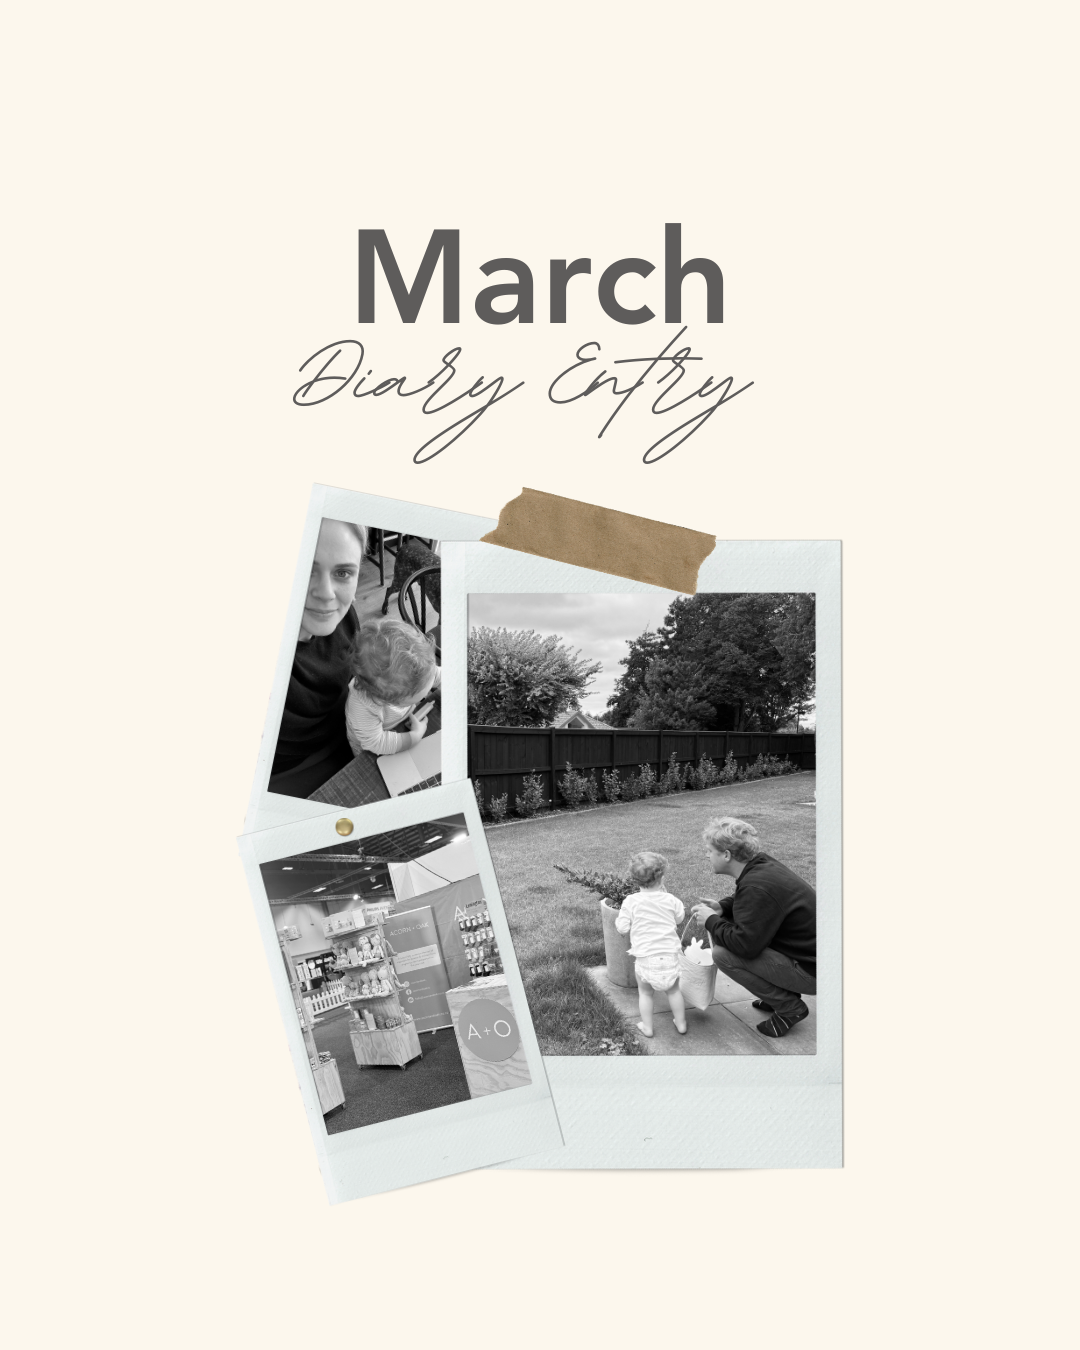 Grace's March Diary Entry